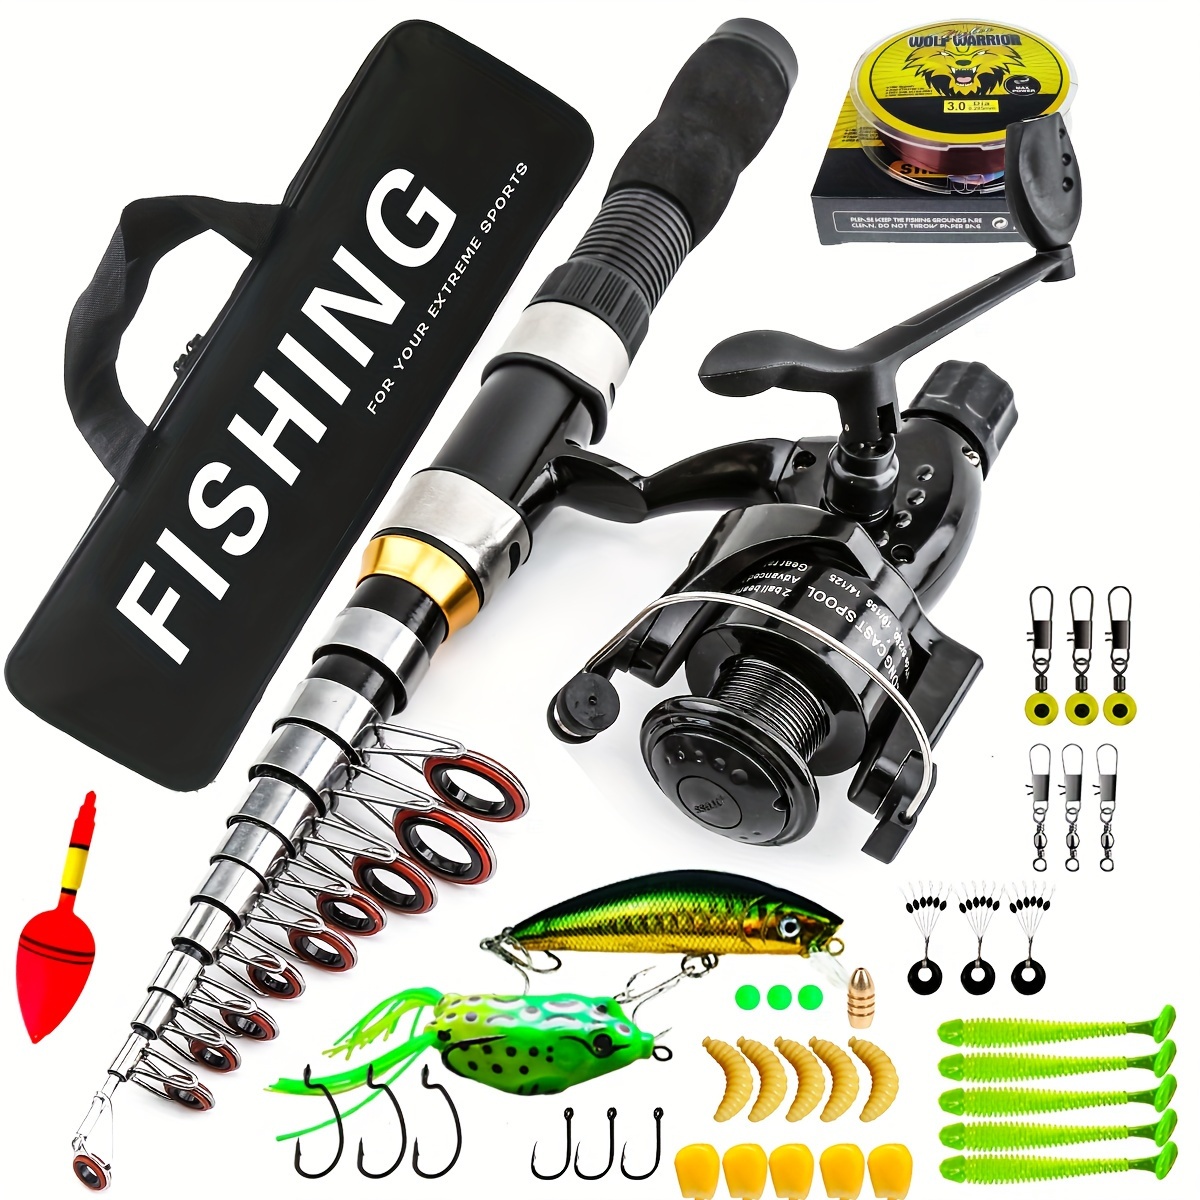 ODDSPRO Kids Fishing Pole, Portable Telescopic Fishing Rod and Reel Combo  Kit - with Spincast Fishing Reel Tackle Box for Boys, Girls, Youth,  Spinning Combos -  Canada